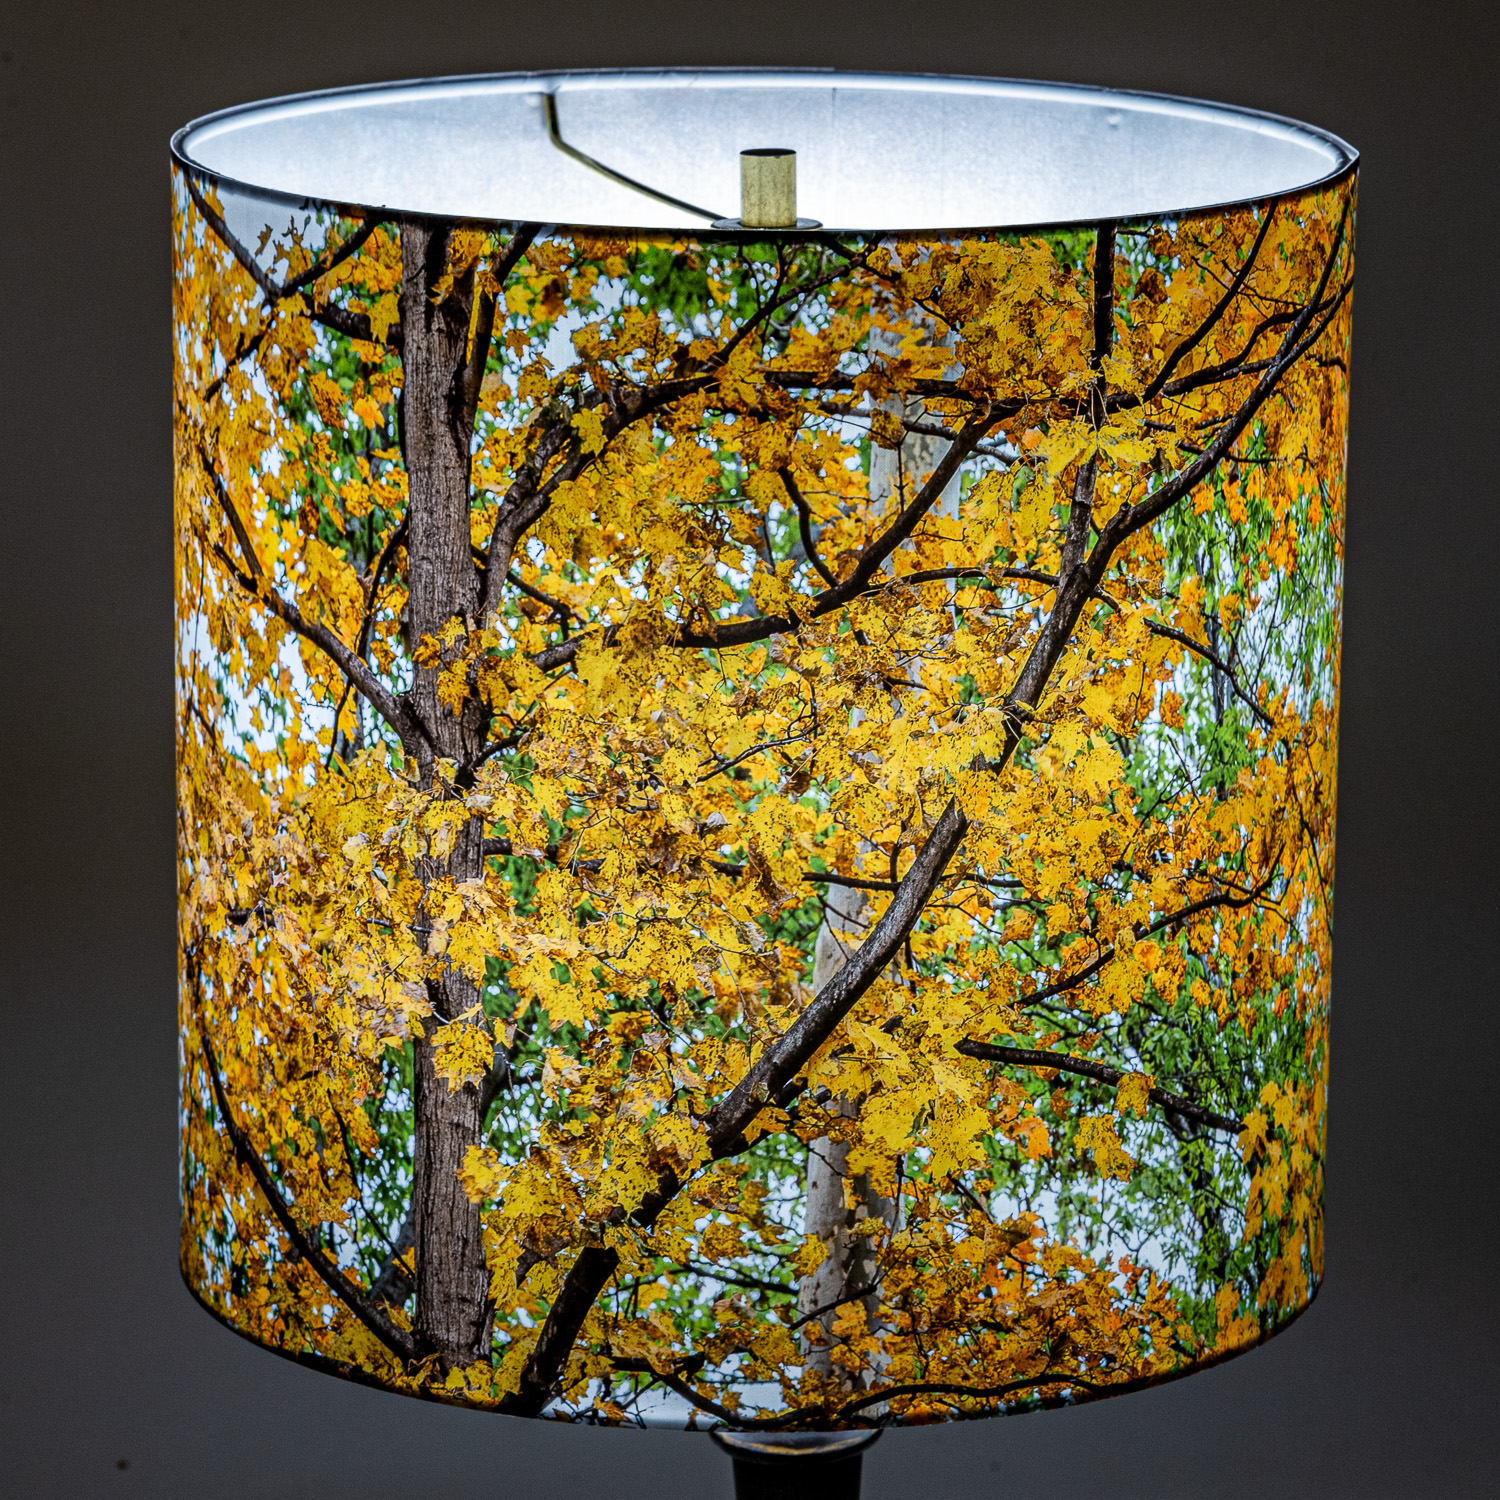 156: Maple tree in fall -- Photo on Lamp shade by David Elmore